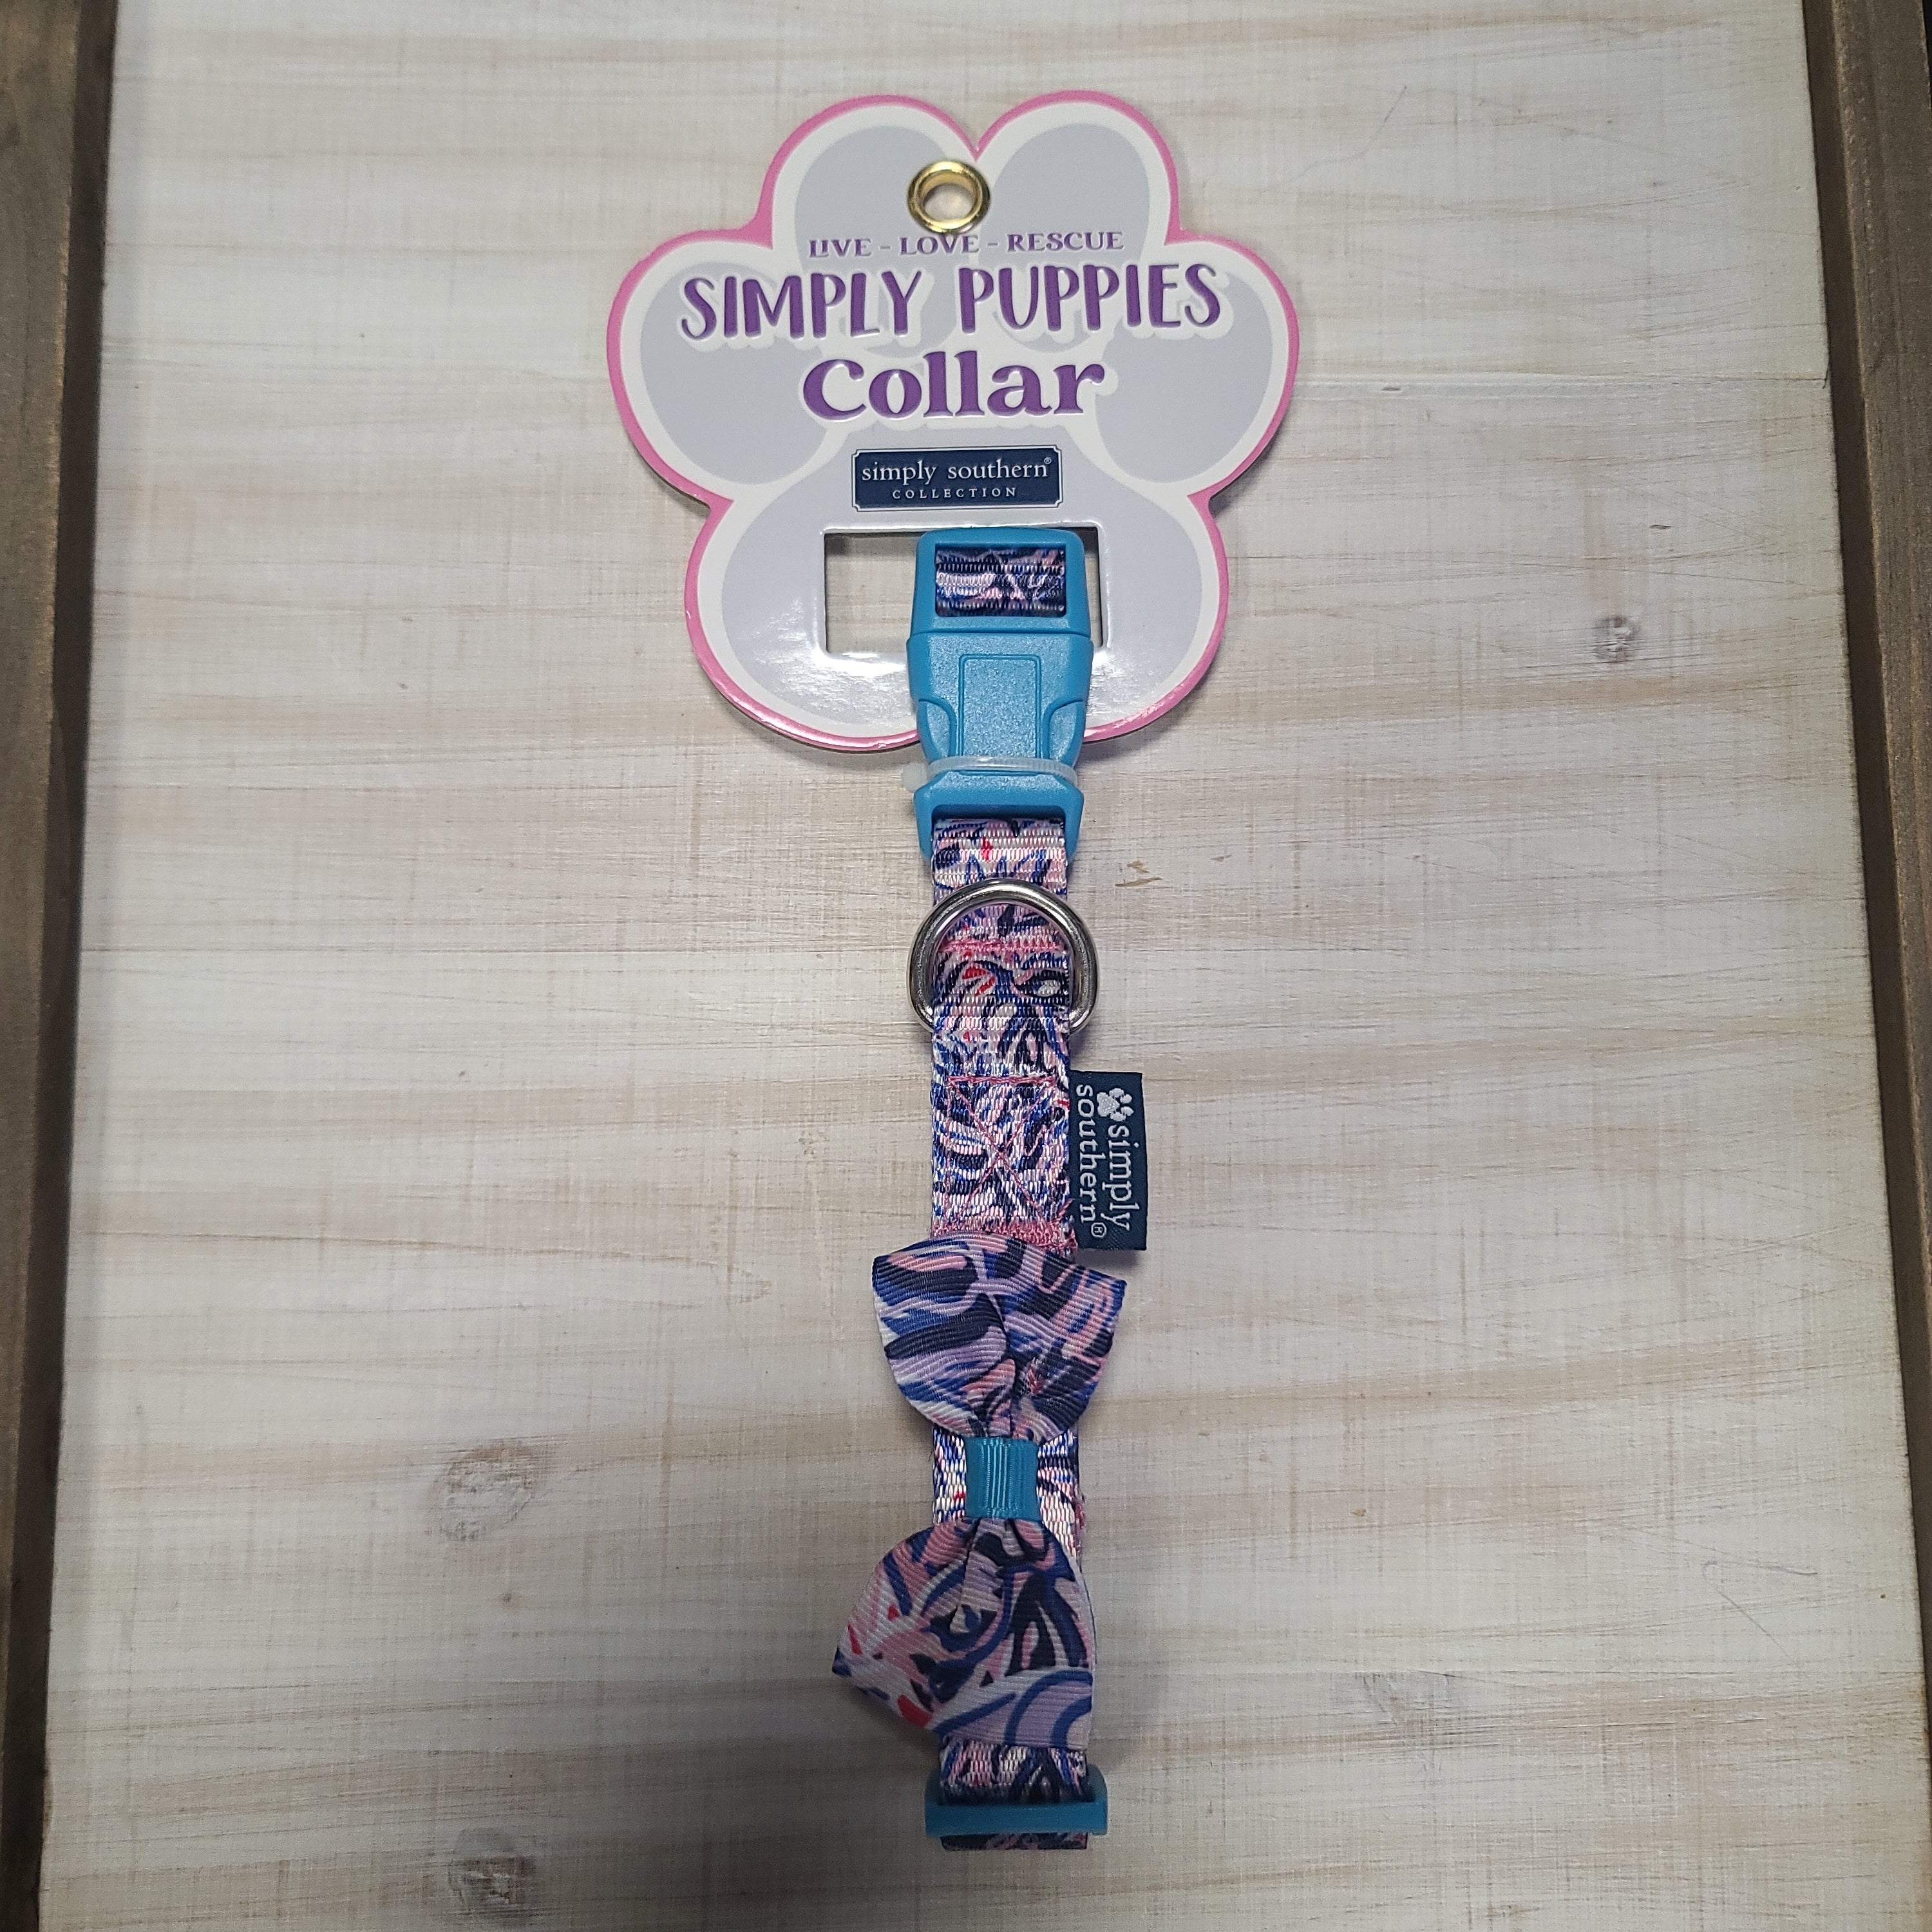 Simply Southern collars